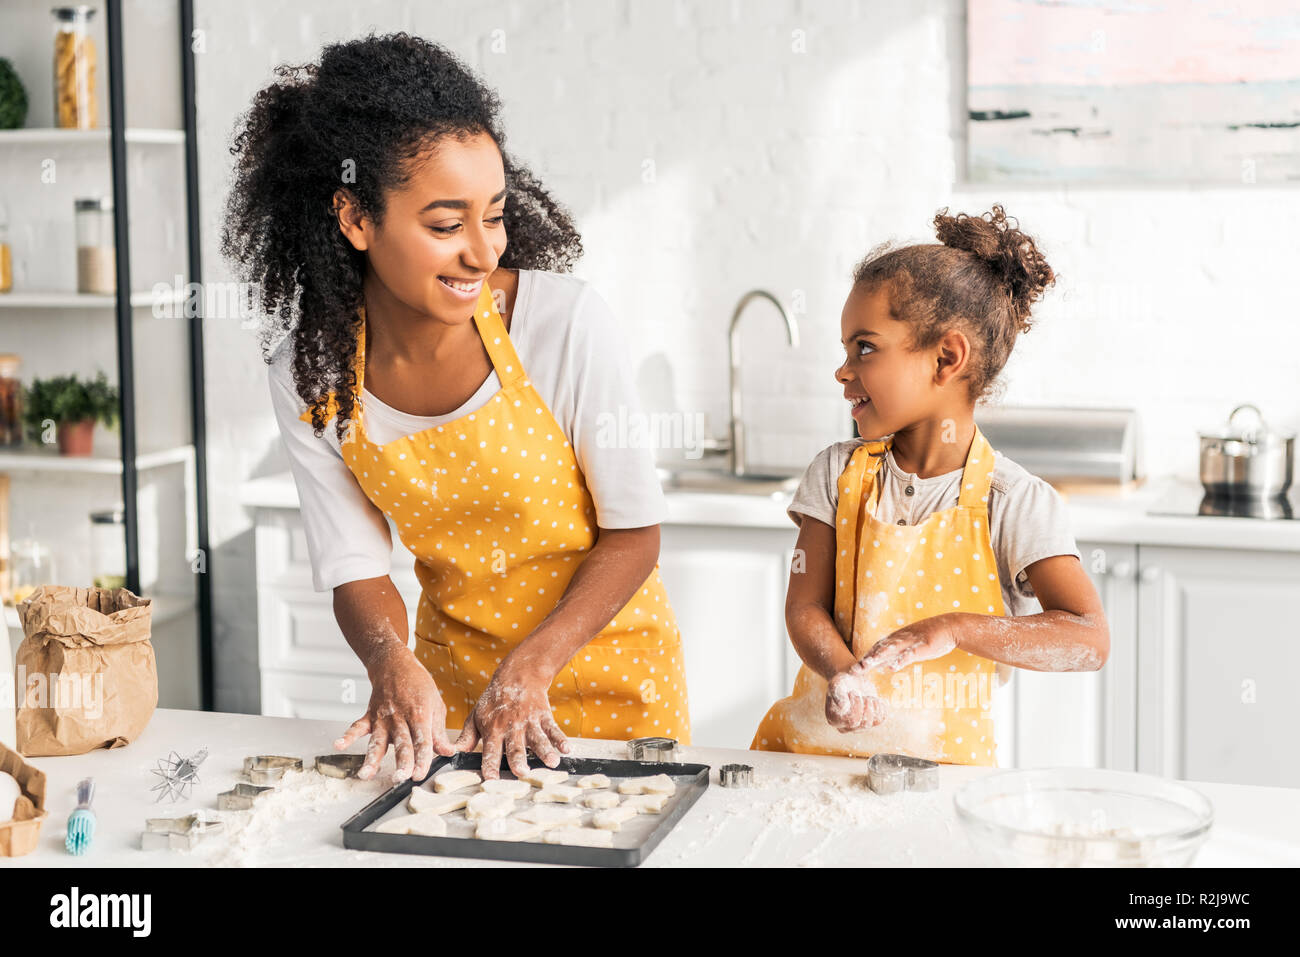 smiling african american mother and daughter preparing cookies and looking at each other in kitchen Stock Photo